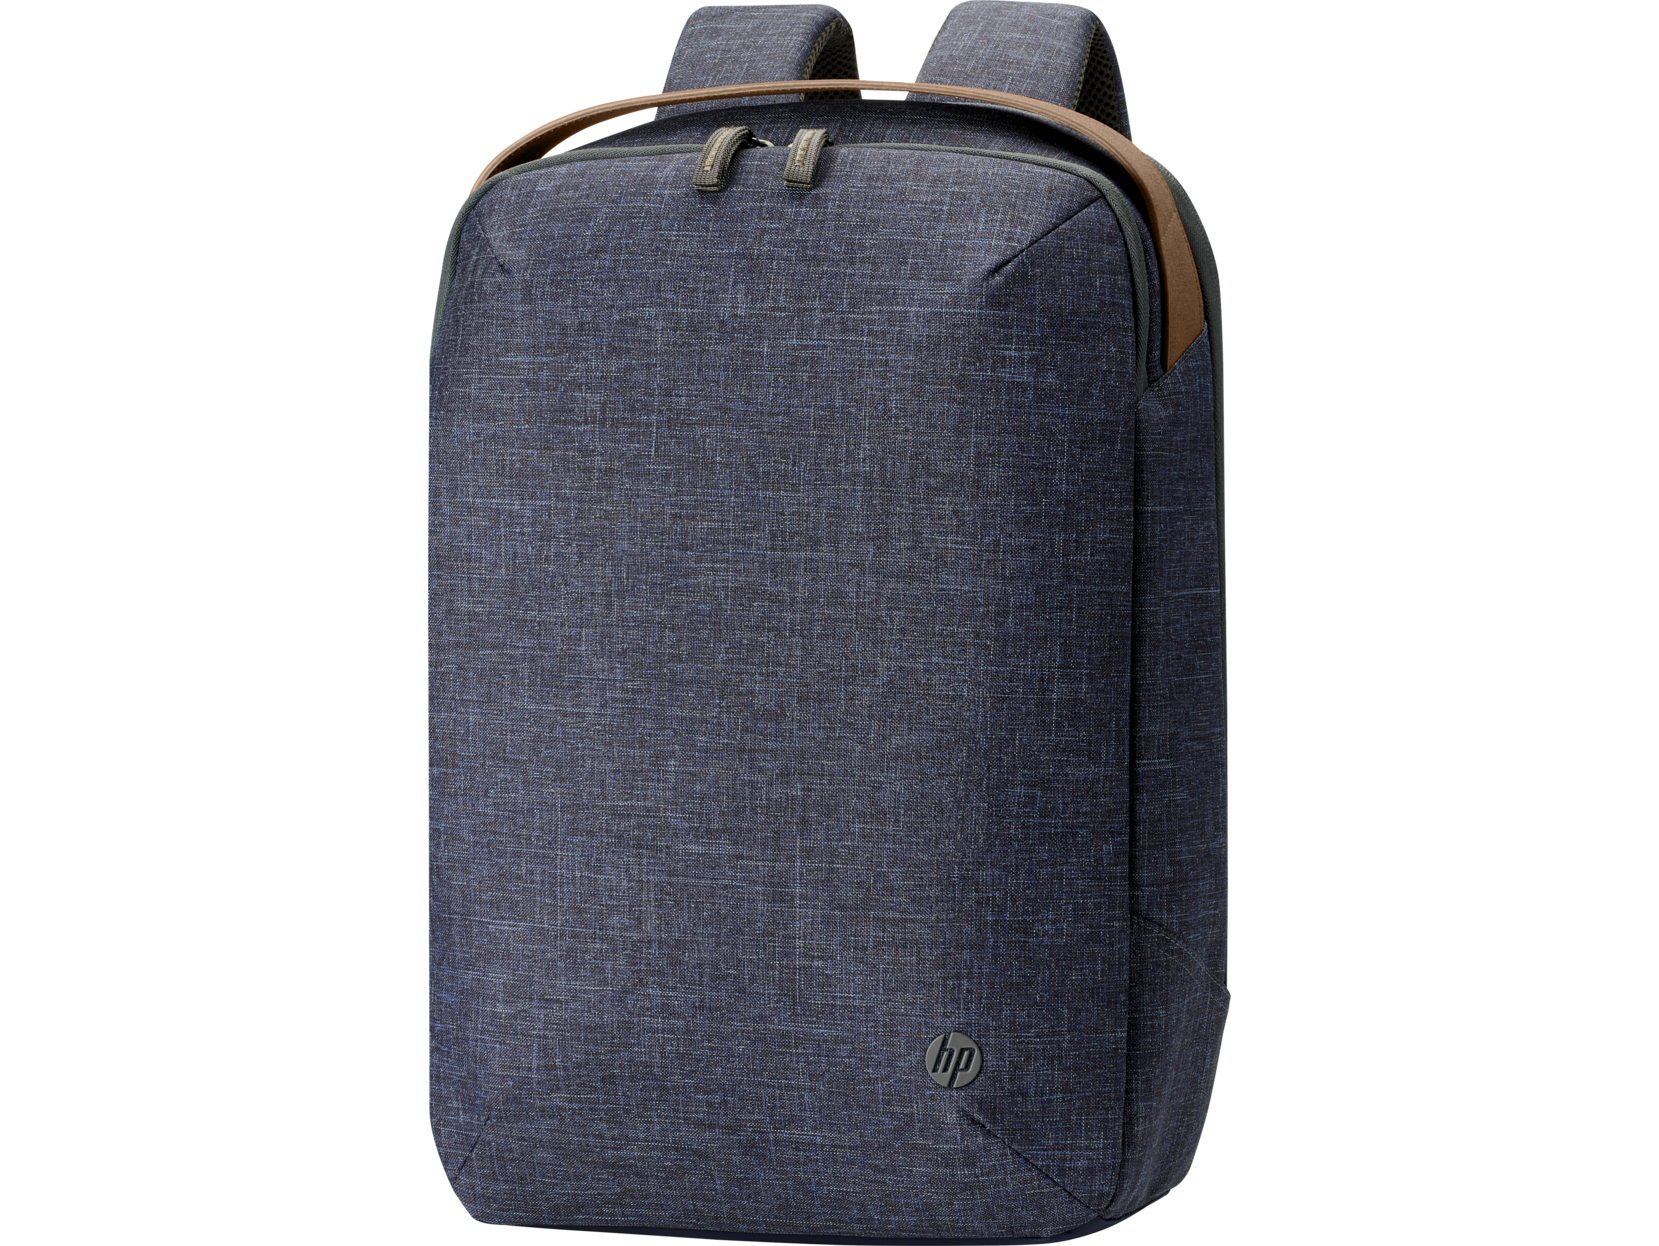 HP Renew Backpack - image 3 of 6